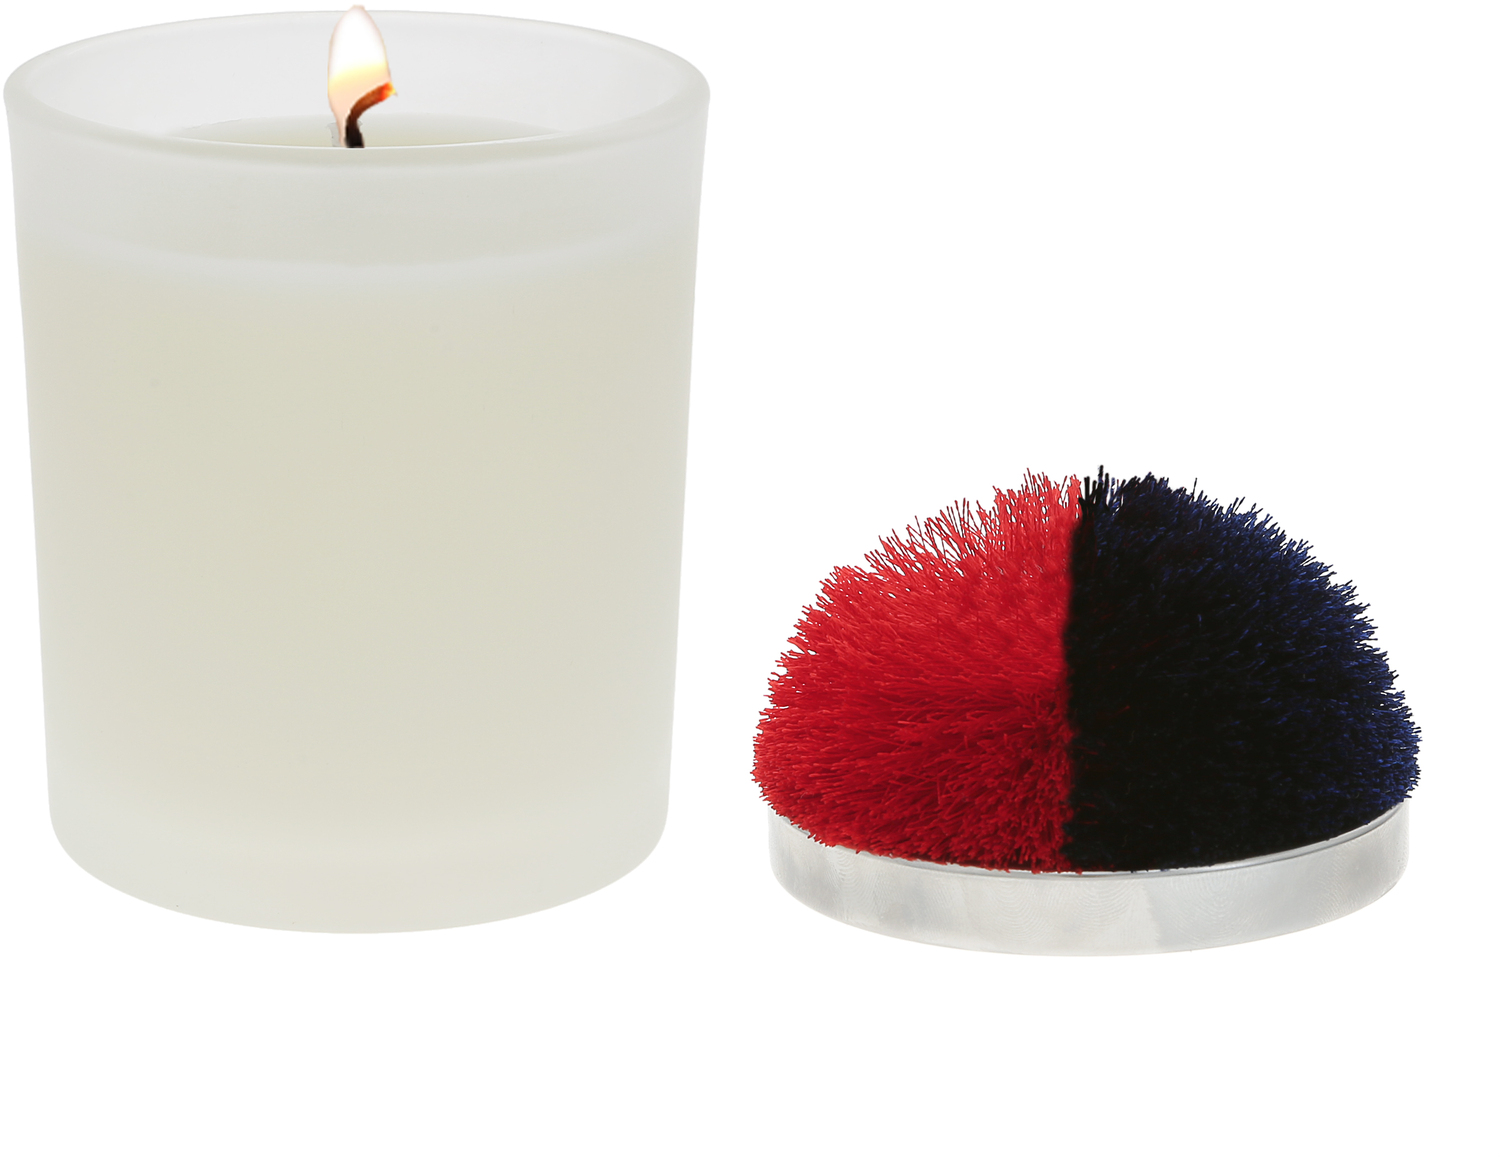 Blank - Red & Navy by Repre-Scent - Blank - Red & Navy - 5.5 oz - 100% Soy Wax Candle with Pom Pom Lid
Scent: Tranquility